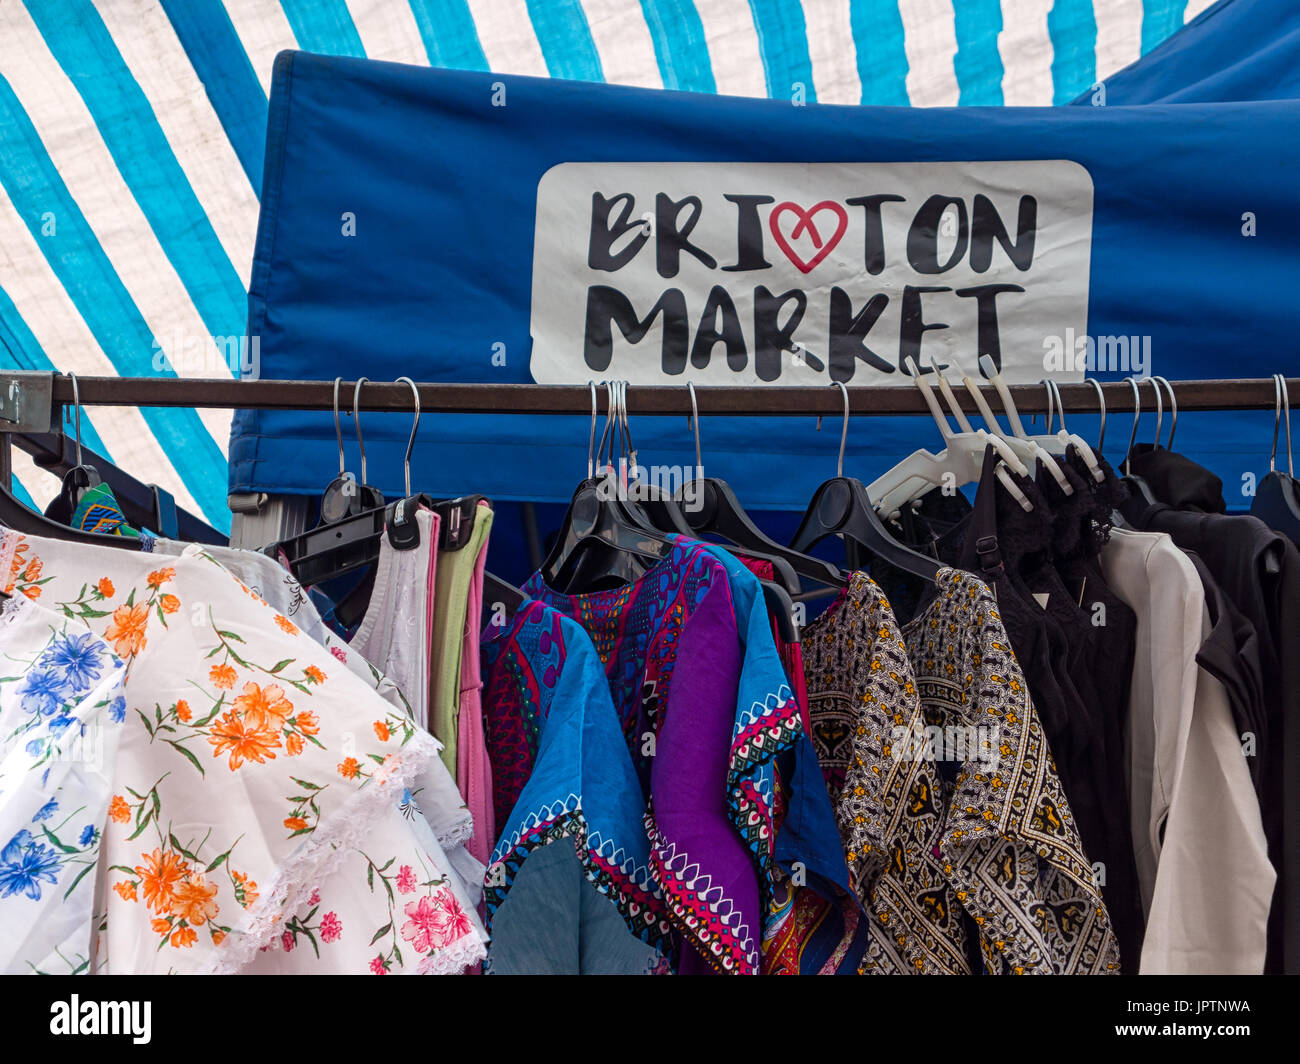 LONDON, UK - JULY 29, 2017:  Clothing Stall on Brixton Market in Electric Avenue with sign Stock Photo